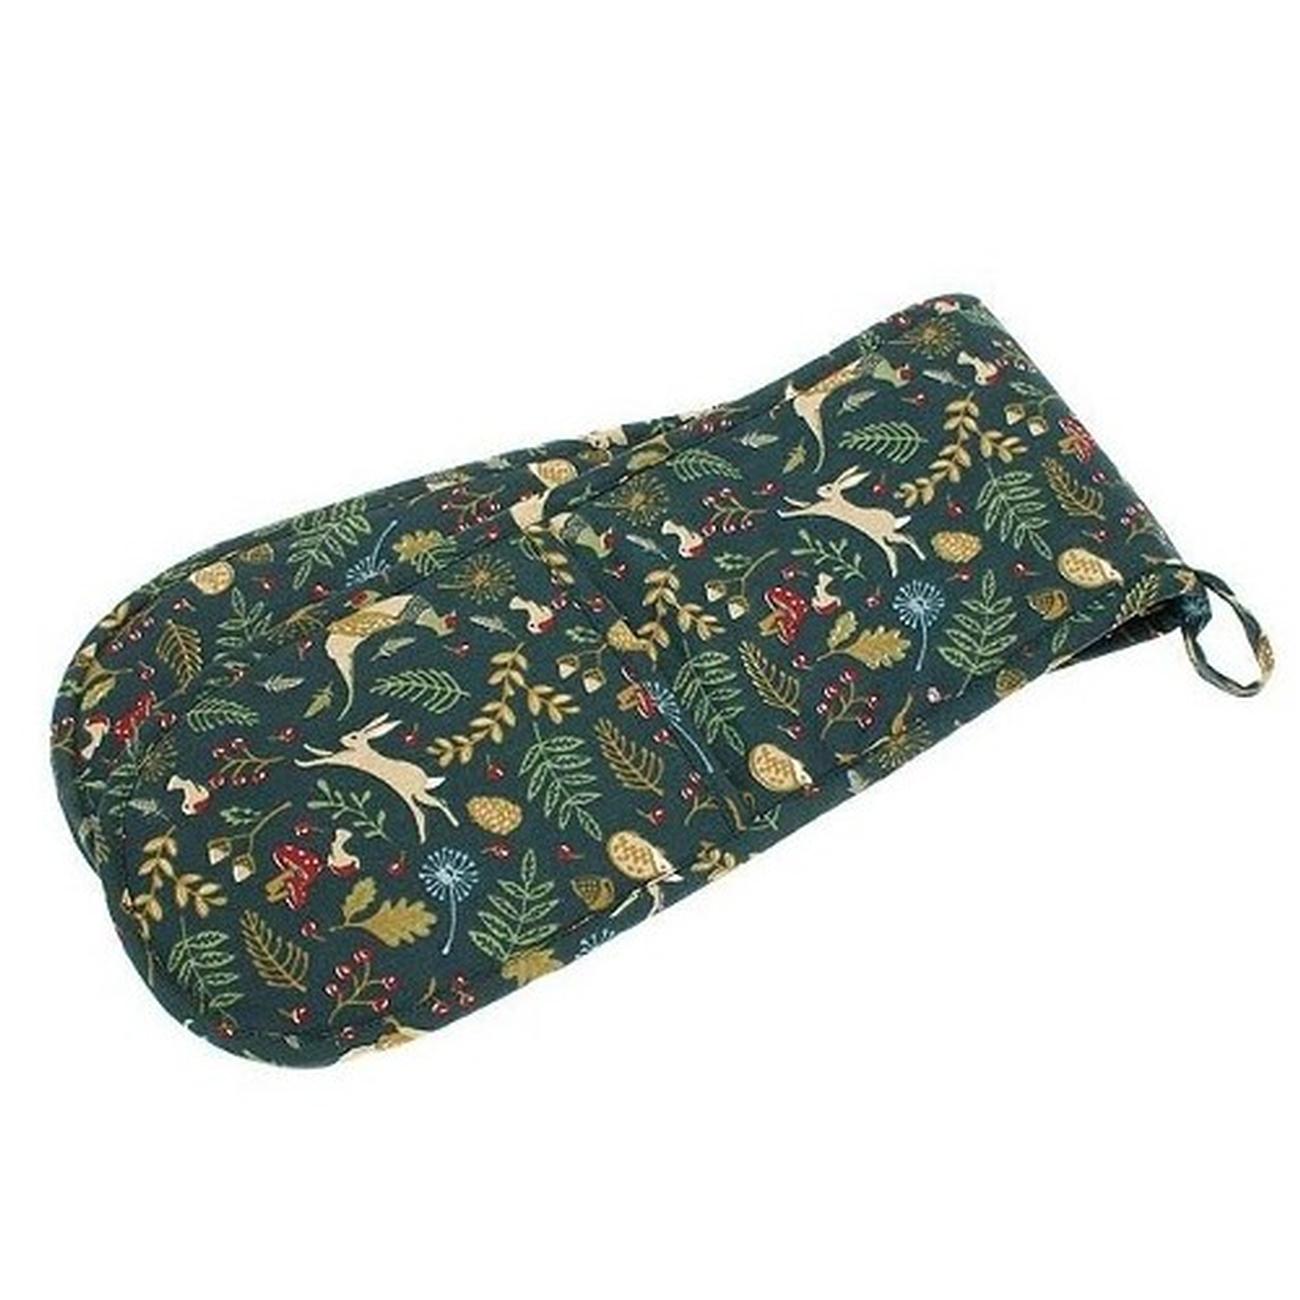 walton-enchanted-forest-double-oven-gloves-festive-linens - Walton & Co Enchanted Forest Double Oven Glove